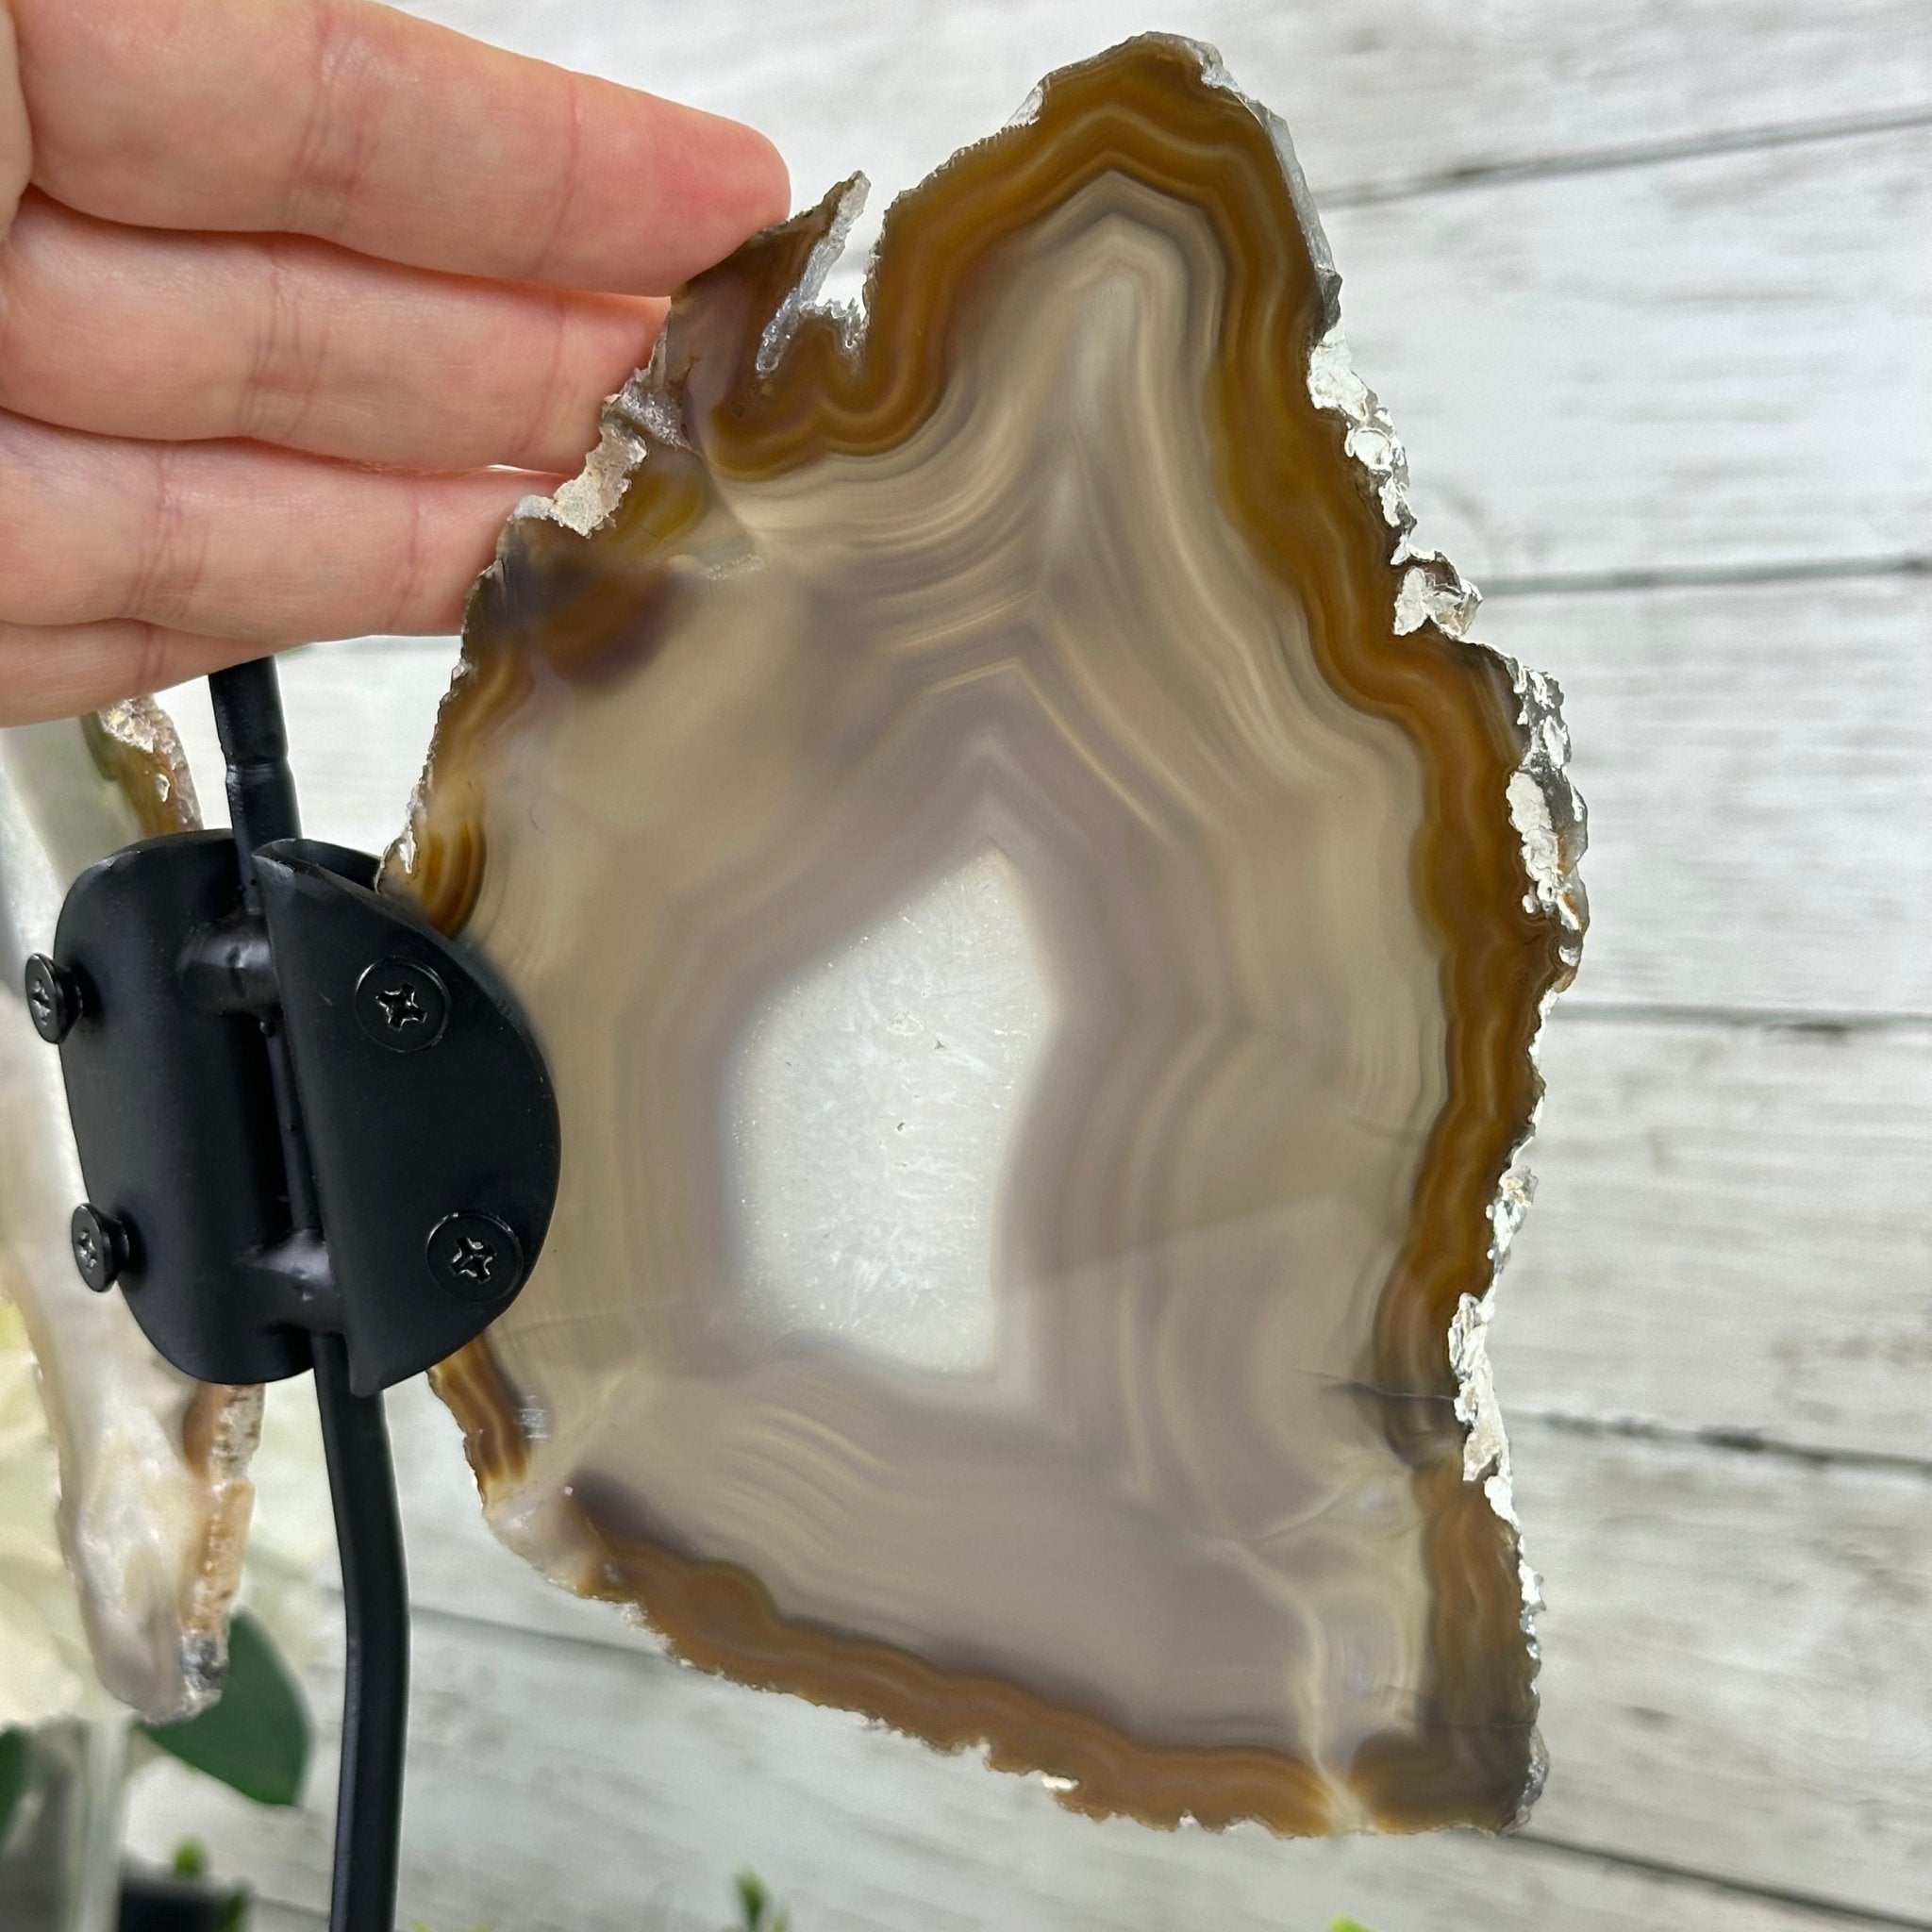 Natural Brazilian Agate "Butterfly Wings", Metal Stand, 10.1" Tall #5050NA-111 - Brazil GemsBrazil GemsNatural Brazilian Agate "Butterfly Wings", Metal Stand, 10.1" Tall #5050NA-111Agate Butterfly Wings5050NA-111